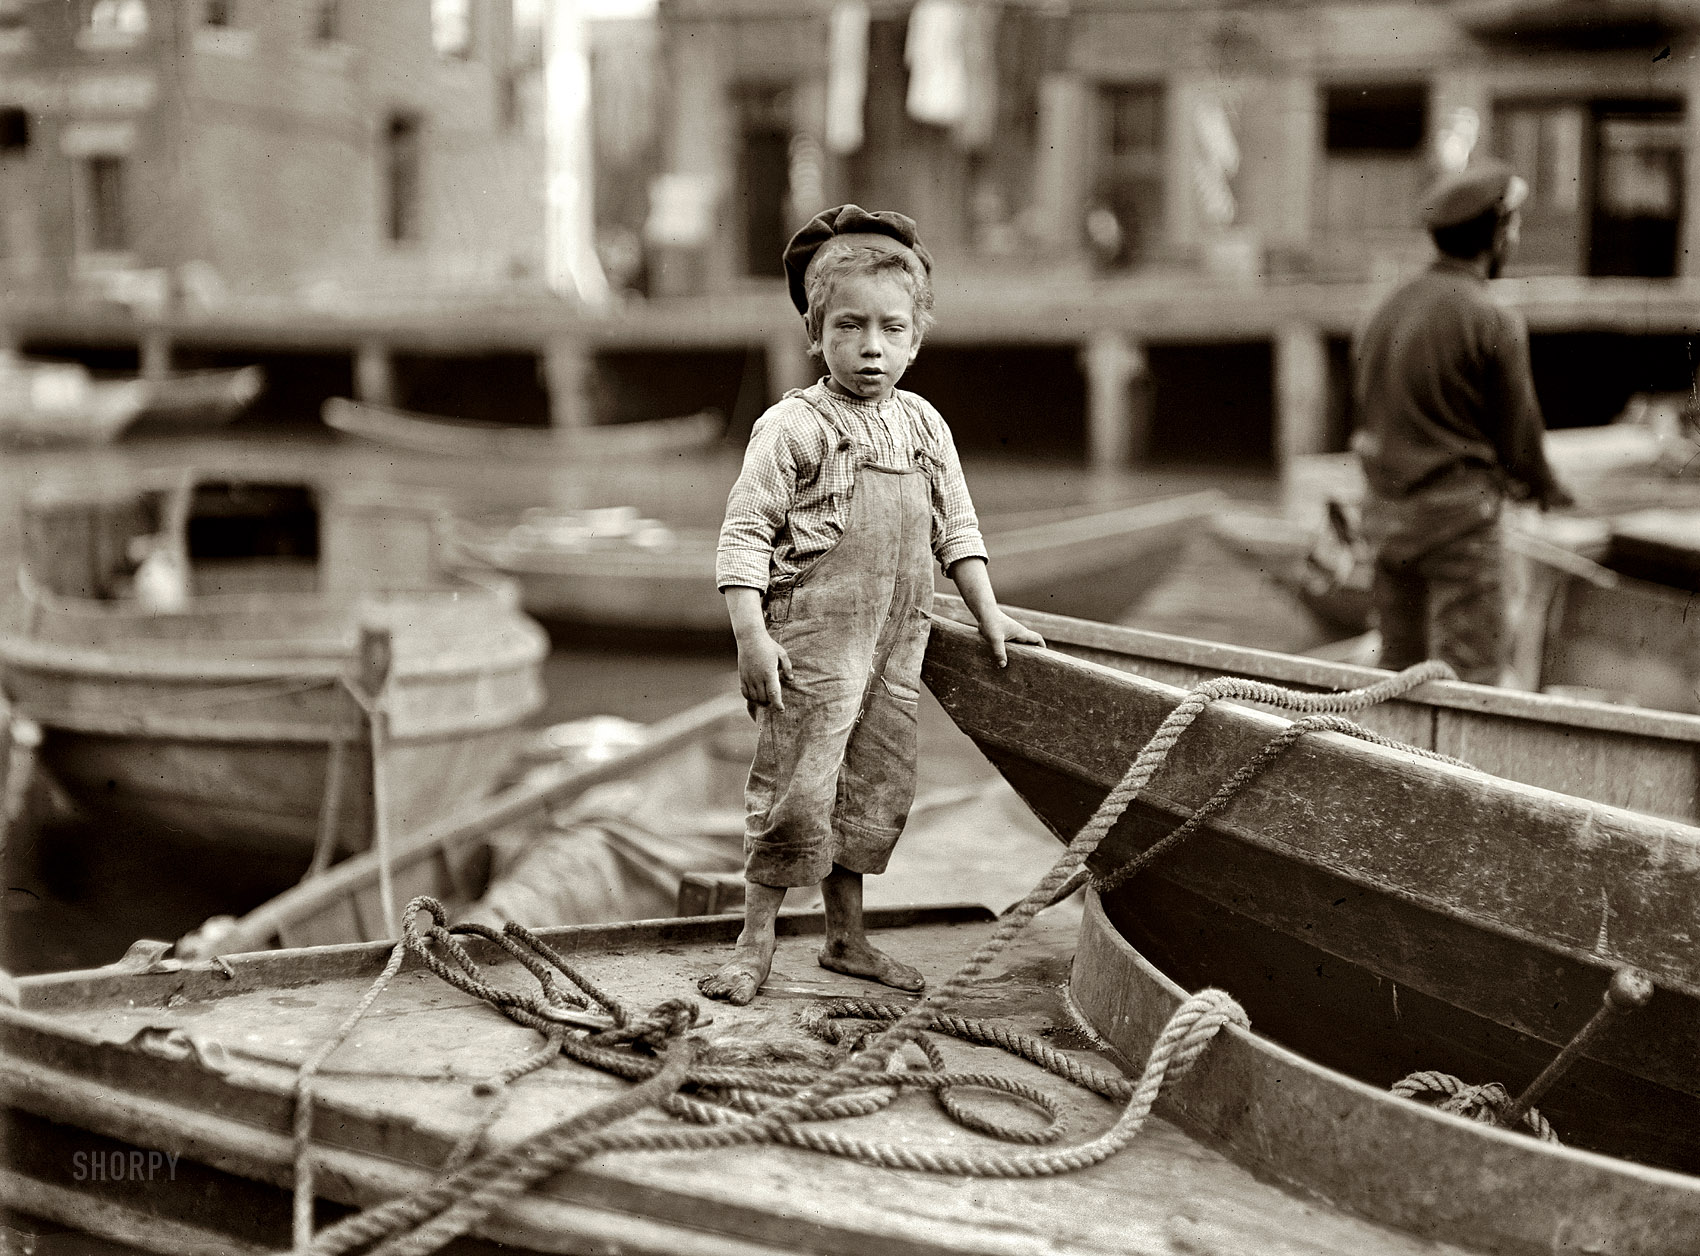 October 1909. Boston, Massachusetts. "Truant hanging around boats in the harbor during school hours." Photgraph by Lewis Wickes Hine. View full size.